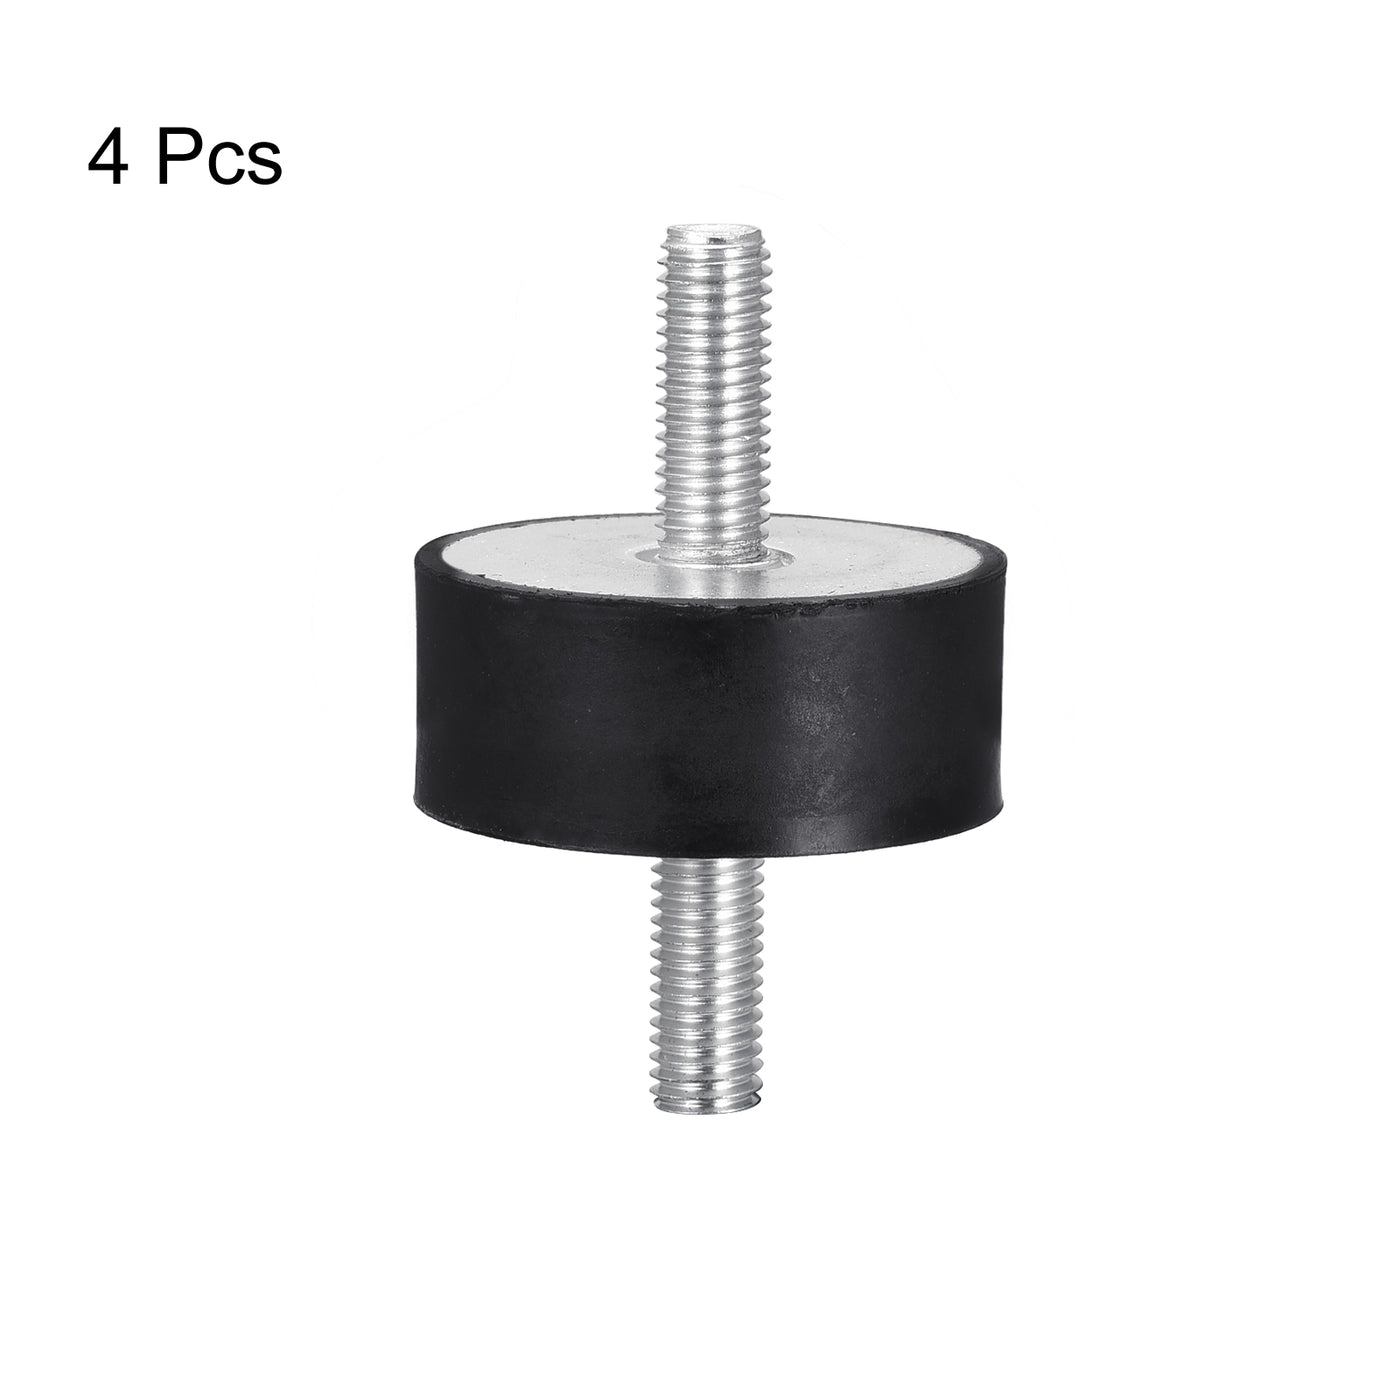 uxcell Uxcell Rubber Mounts 4pcs M4x27mm Male Vibration Isolator Shock Absorber D50mmxH20mm